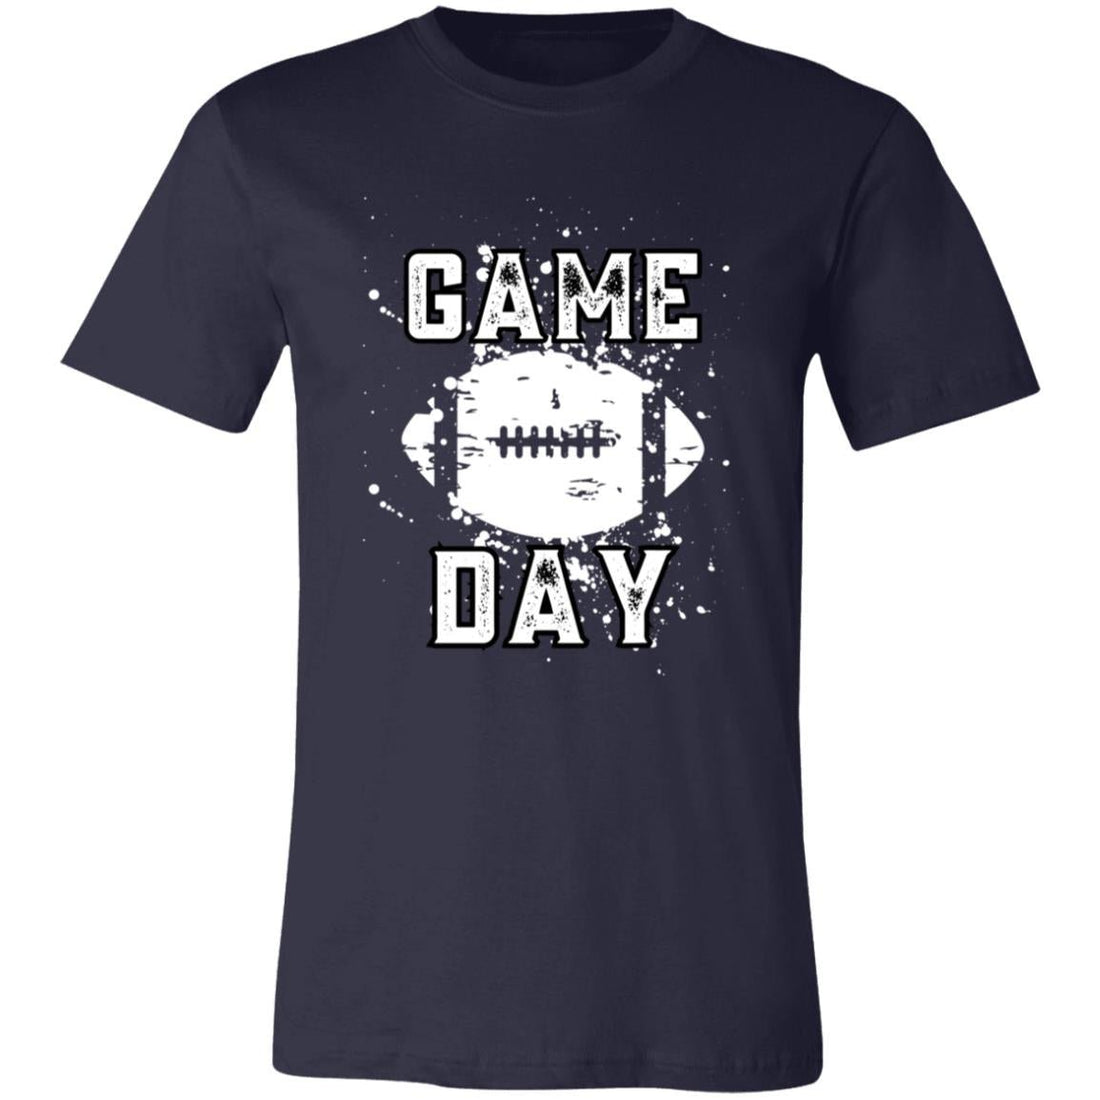 Game Day Distressed Football Short-Sleeve T-Shirt - T-Shirts - Positively Sassy - Game Day Distressed Football Short-Sleeve T-Shirt